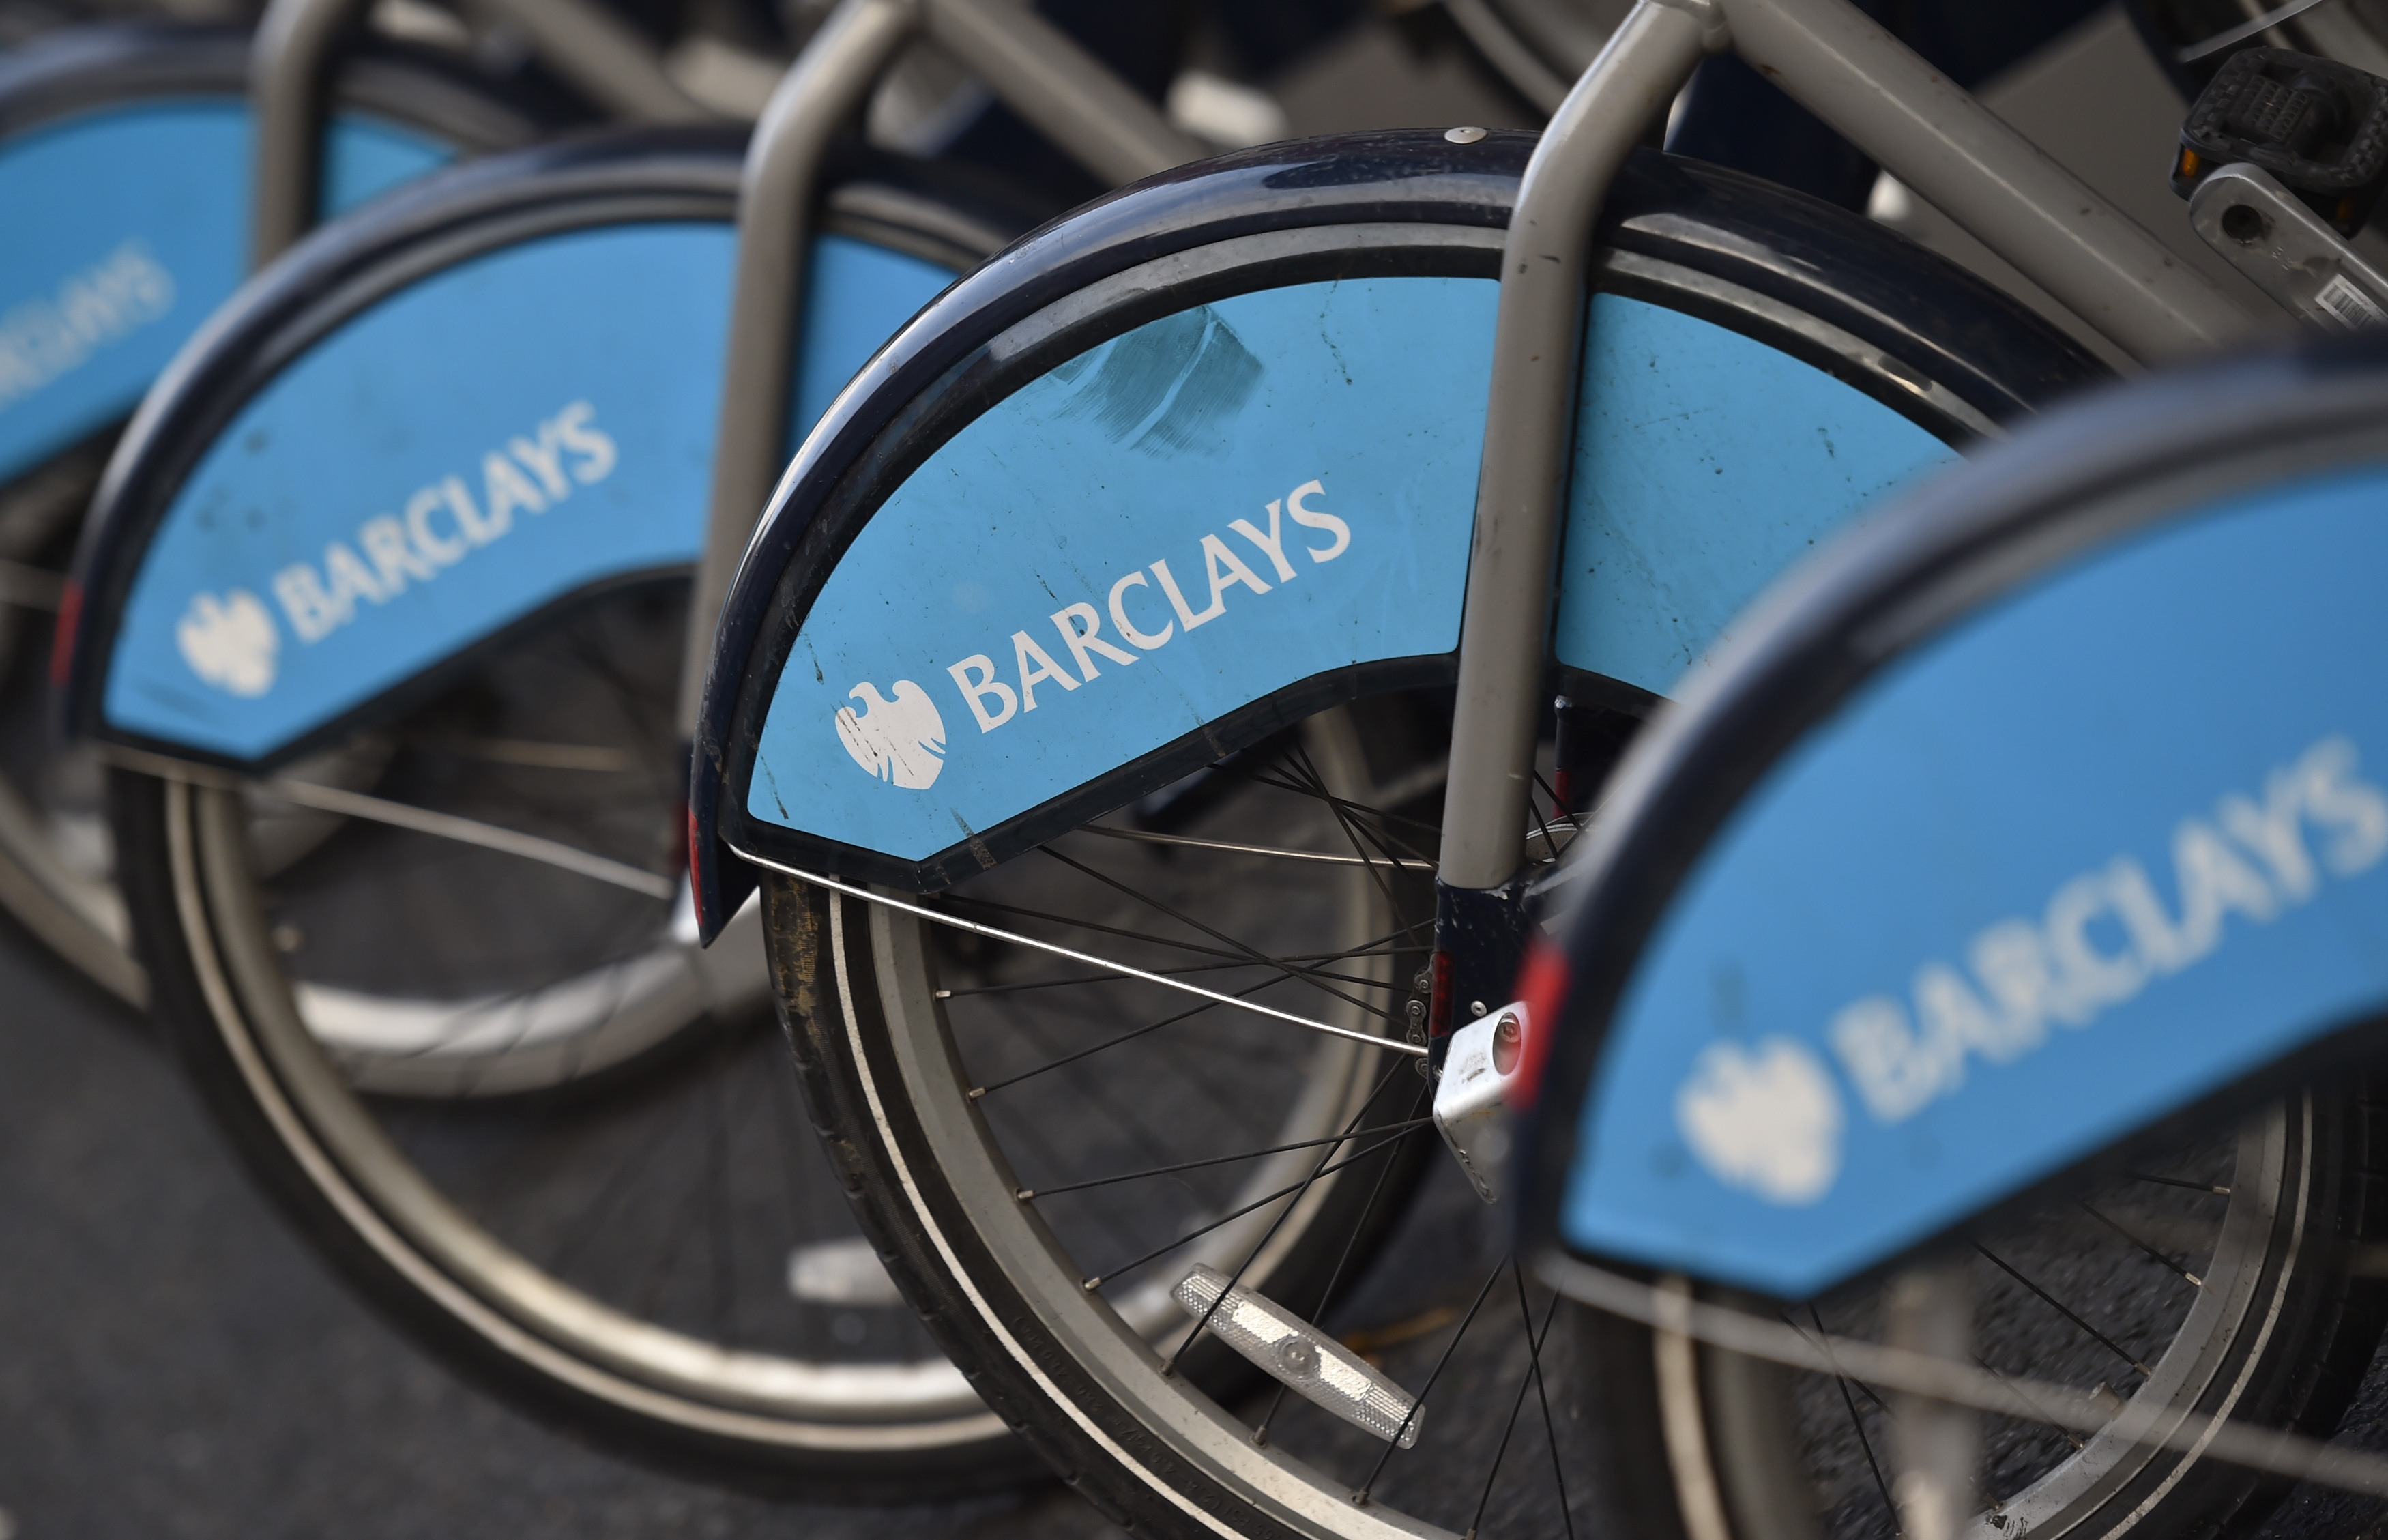 The Barclays logo is seen on public hire bicycles in central London